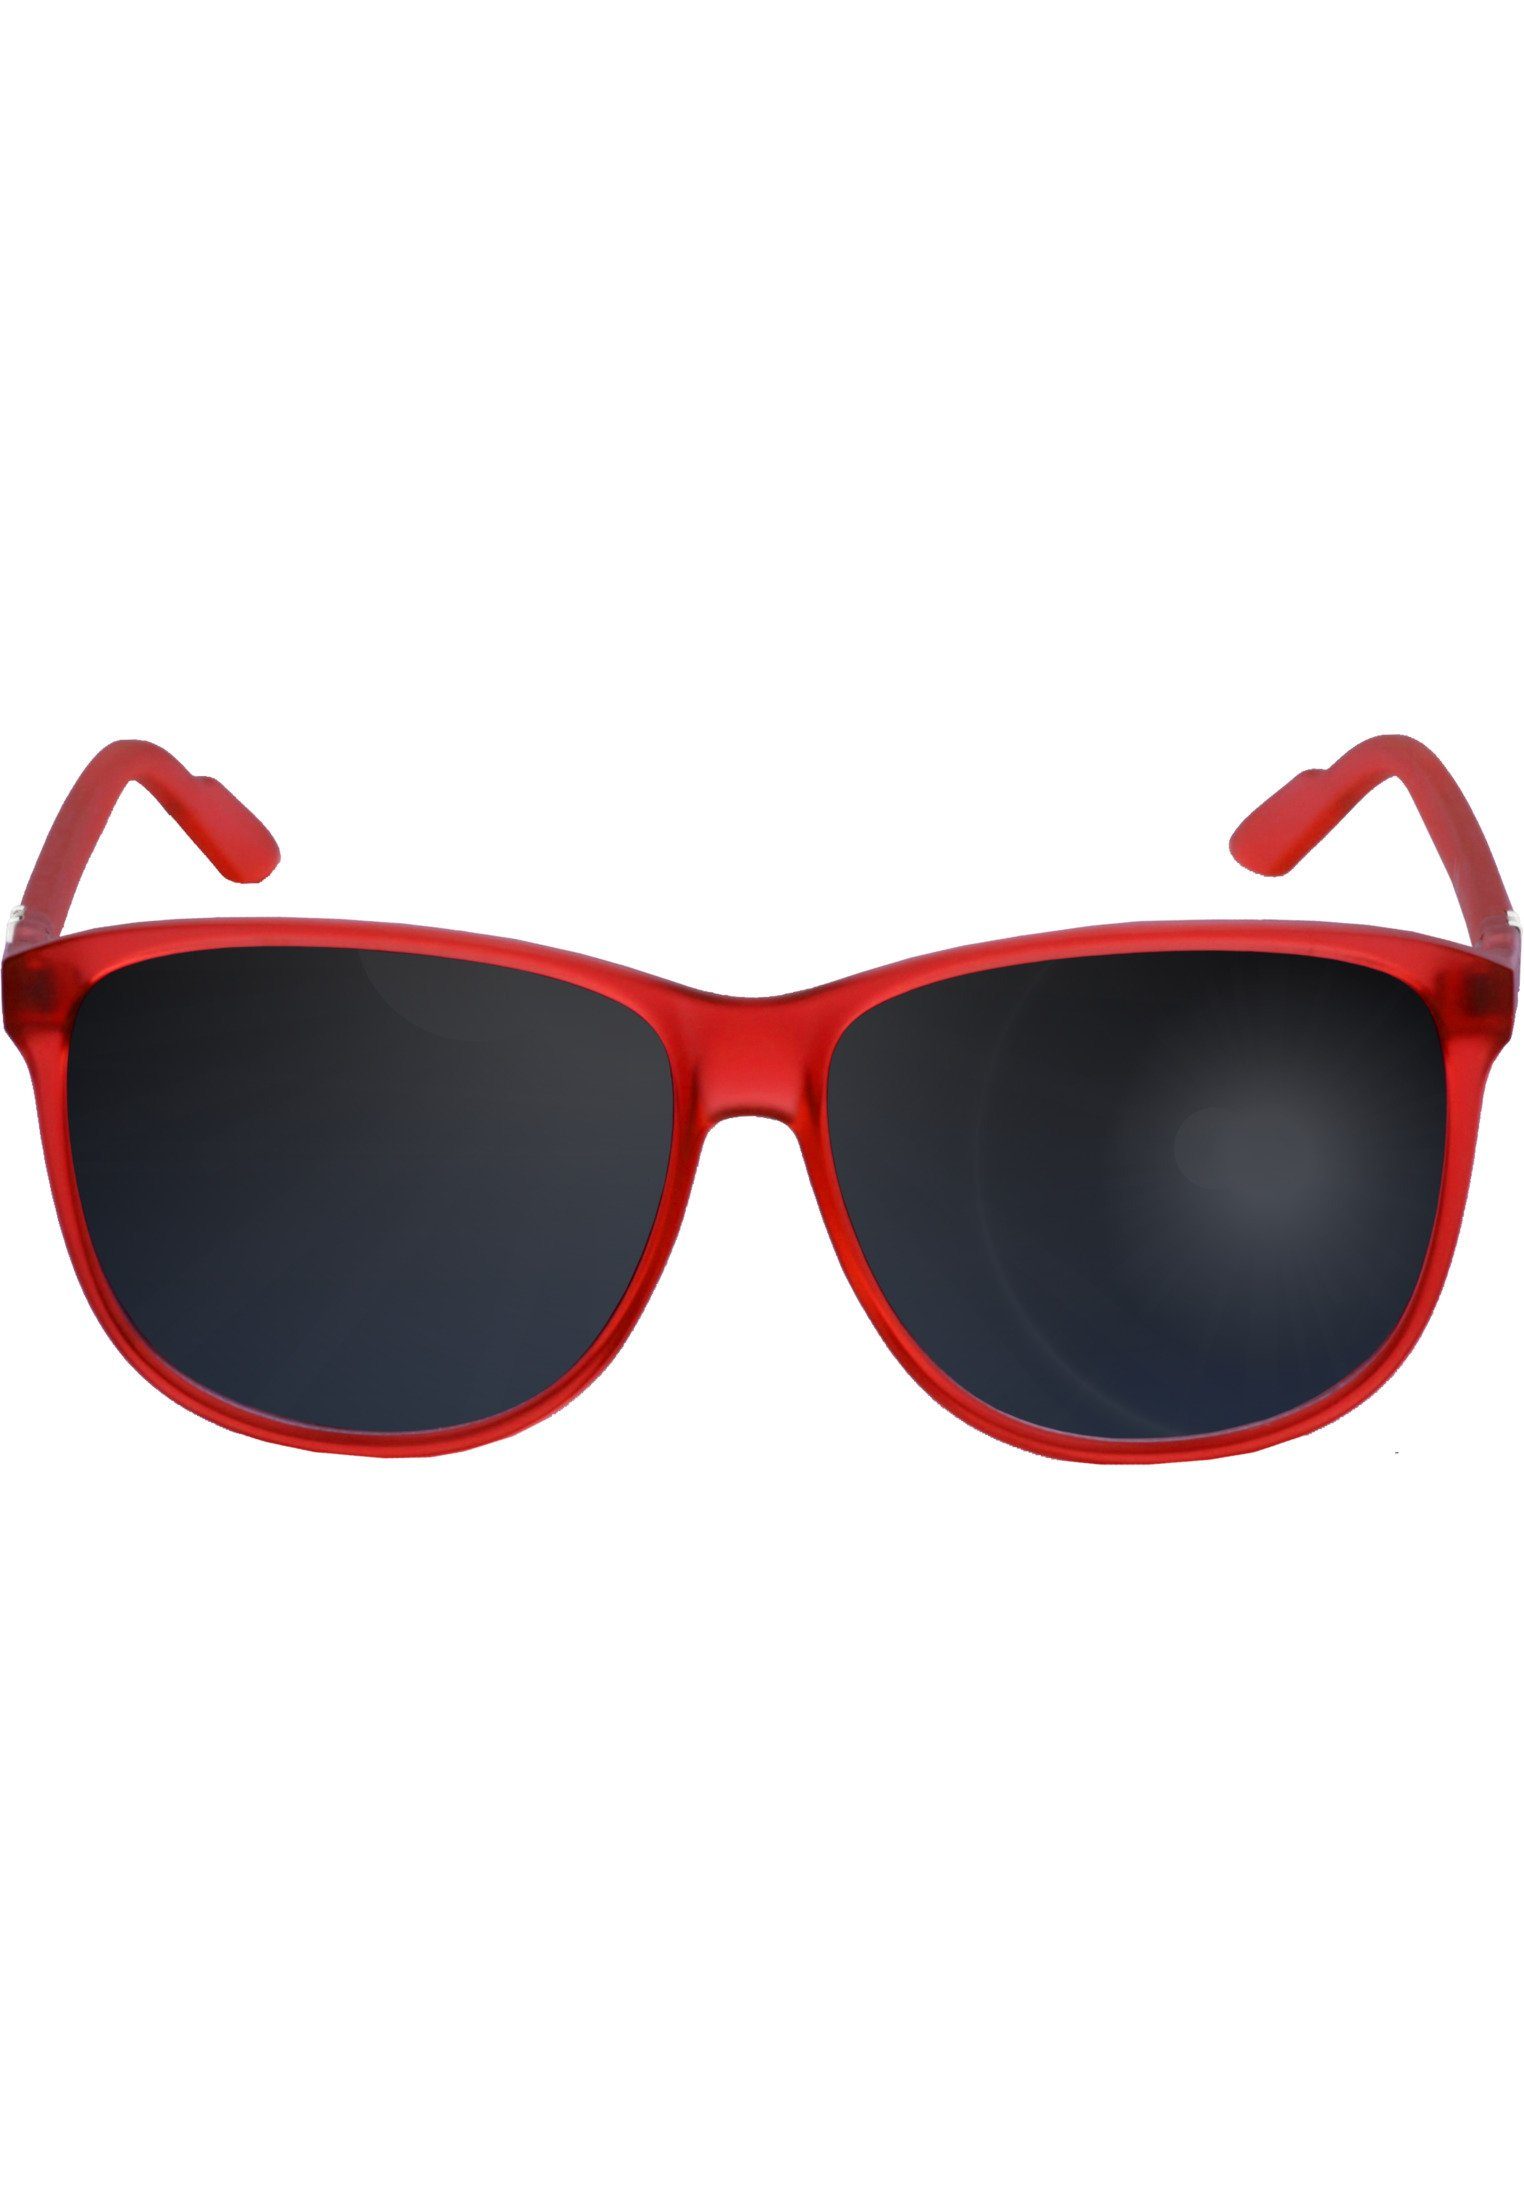 Sonnenbrille Chirwa Sunglasses red Accessoires MSTRDS